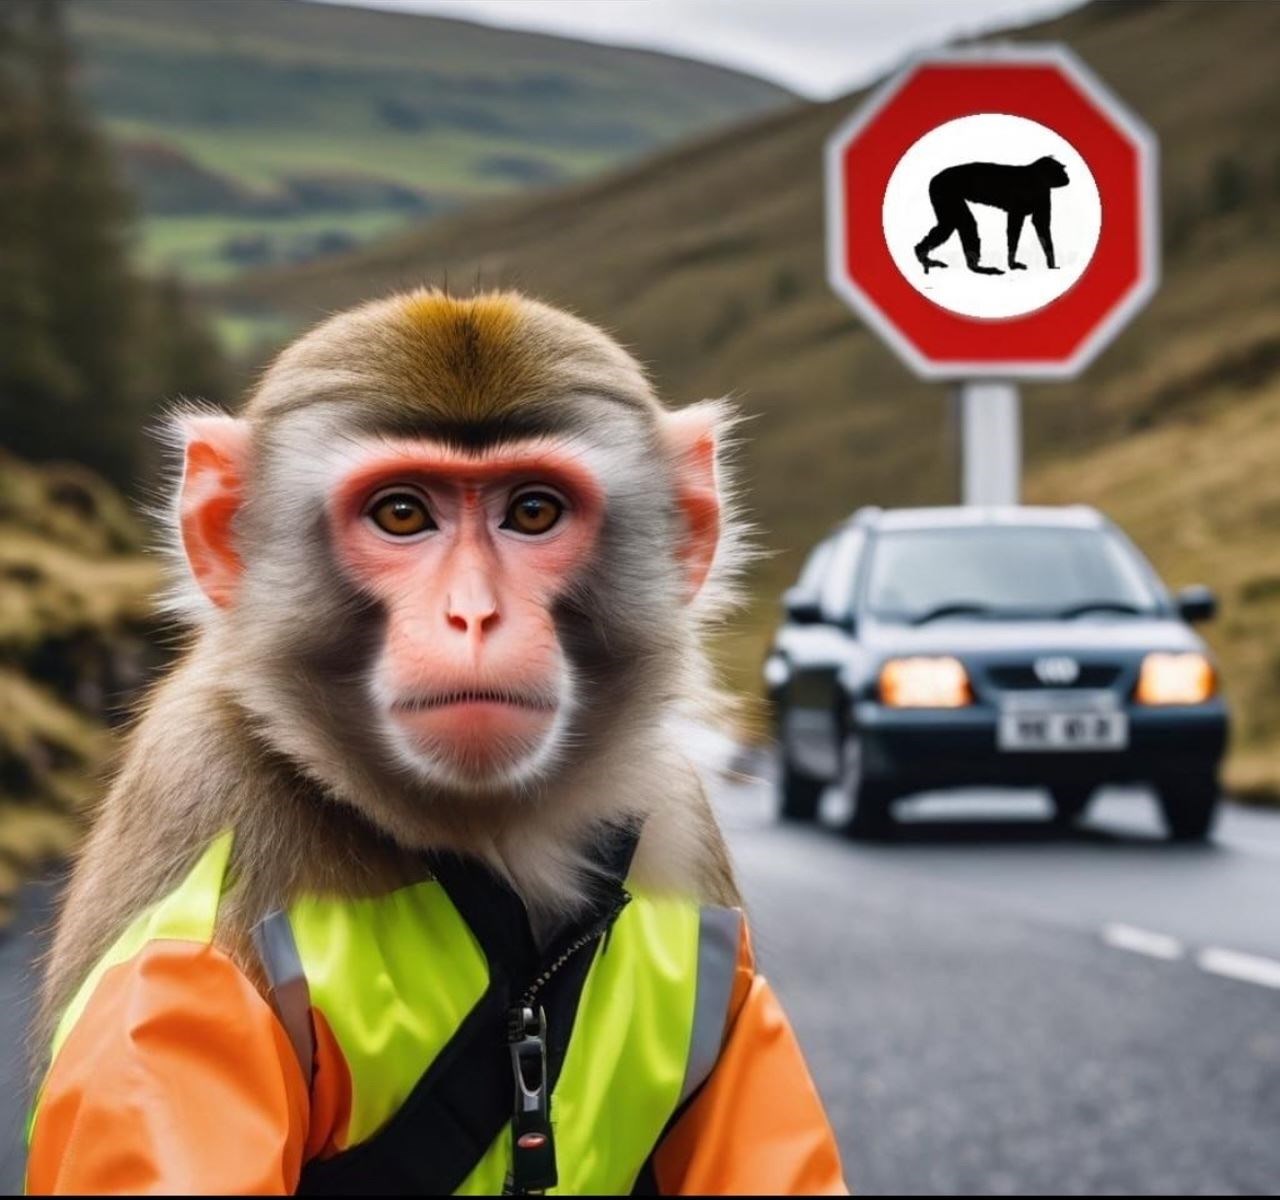 Assisting with the dualling of the A9. Image: Steve Ferguson, Heb Memes, Lewis & Harris.